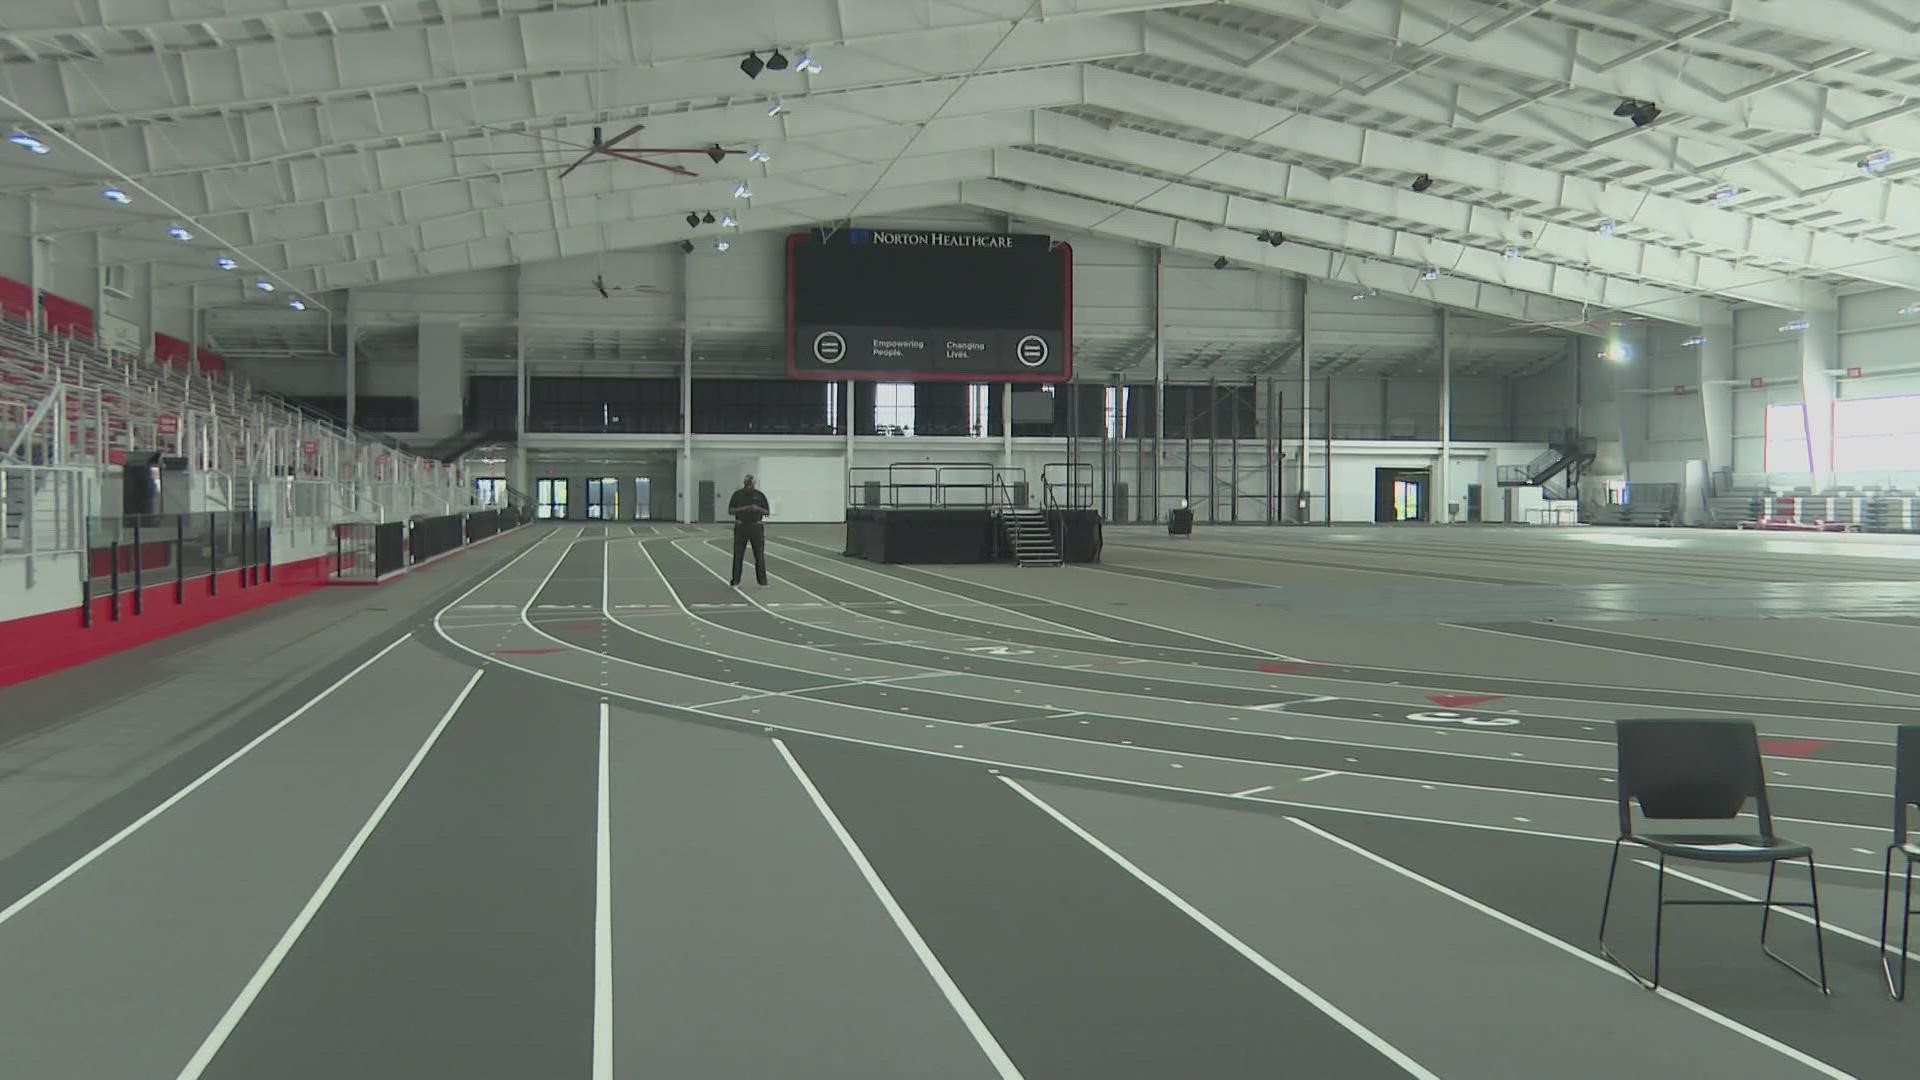 This will be the first time the Louisville Cardinals have hosted the ACC Indoor Track and Field Championships